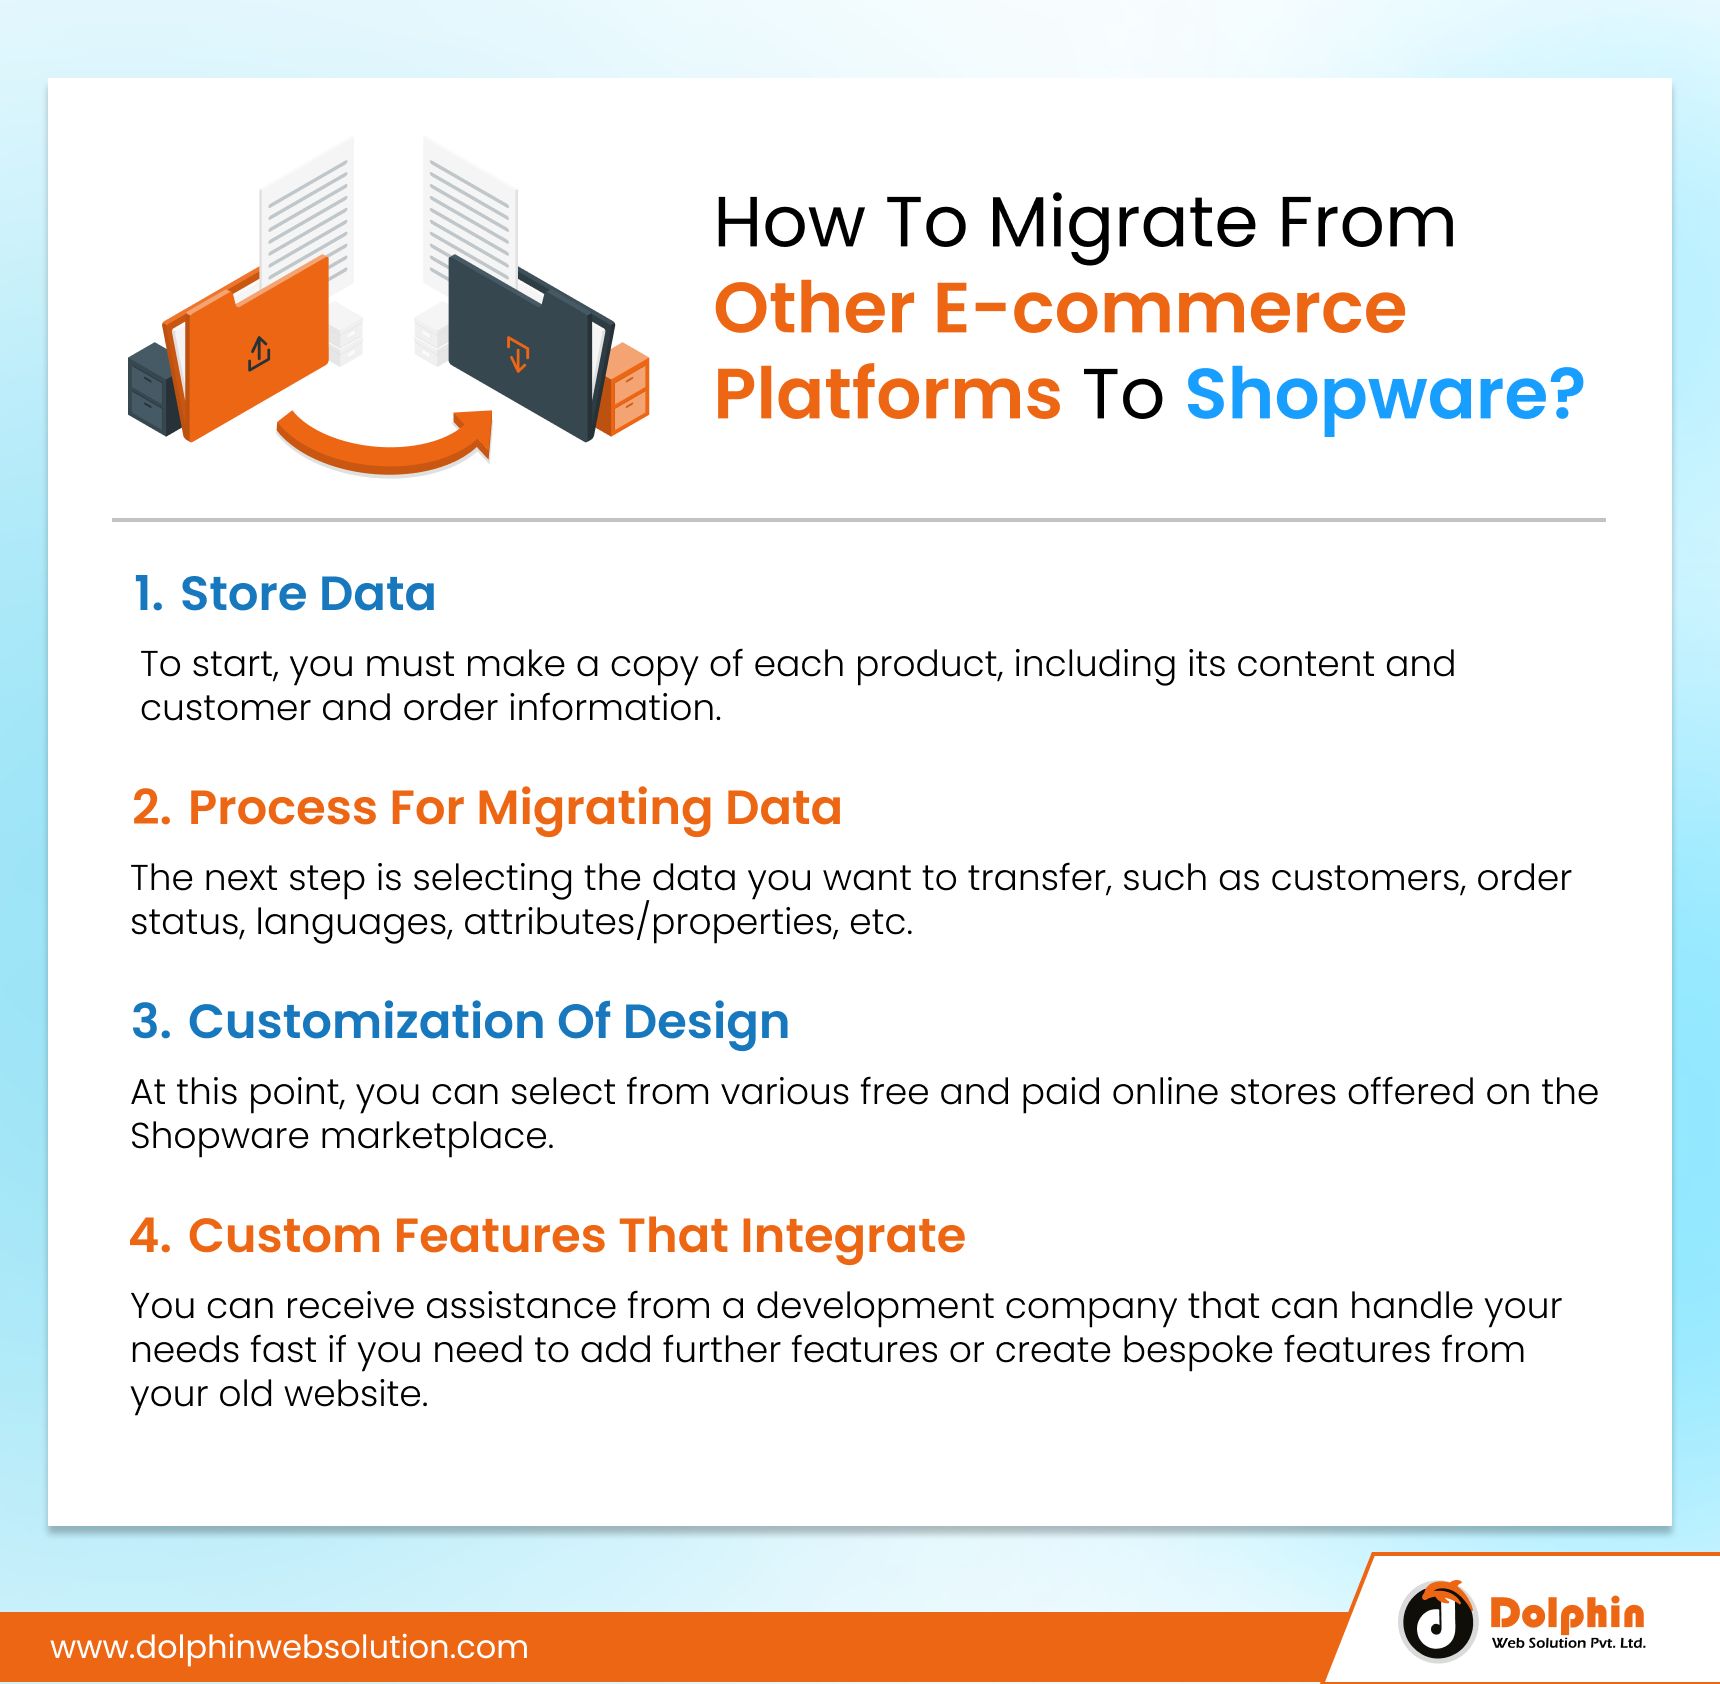 Migrate From Other E-commerce Platforms To Shopware